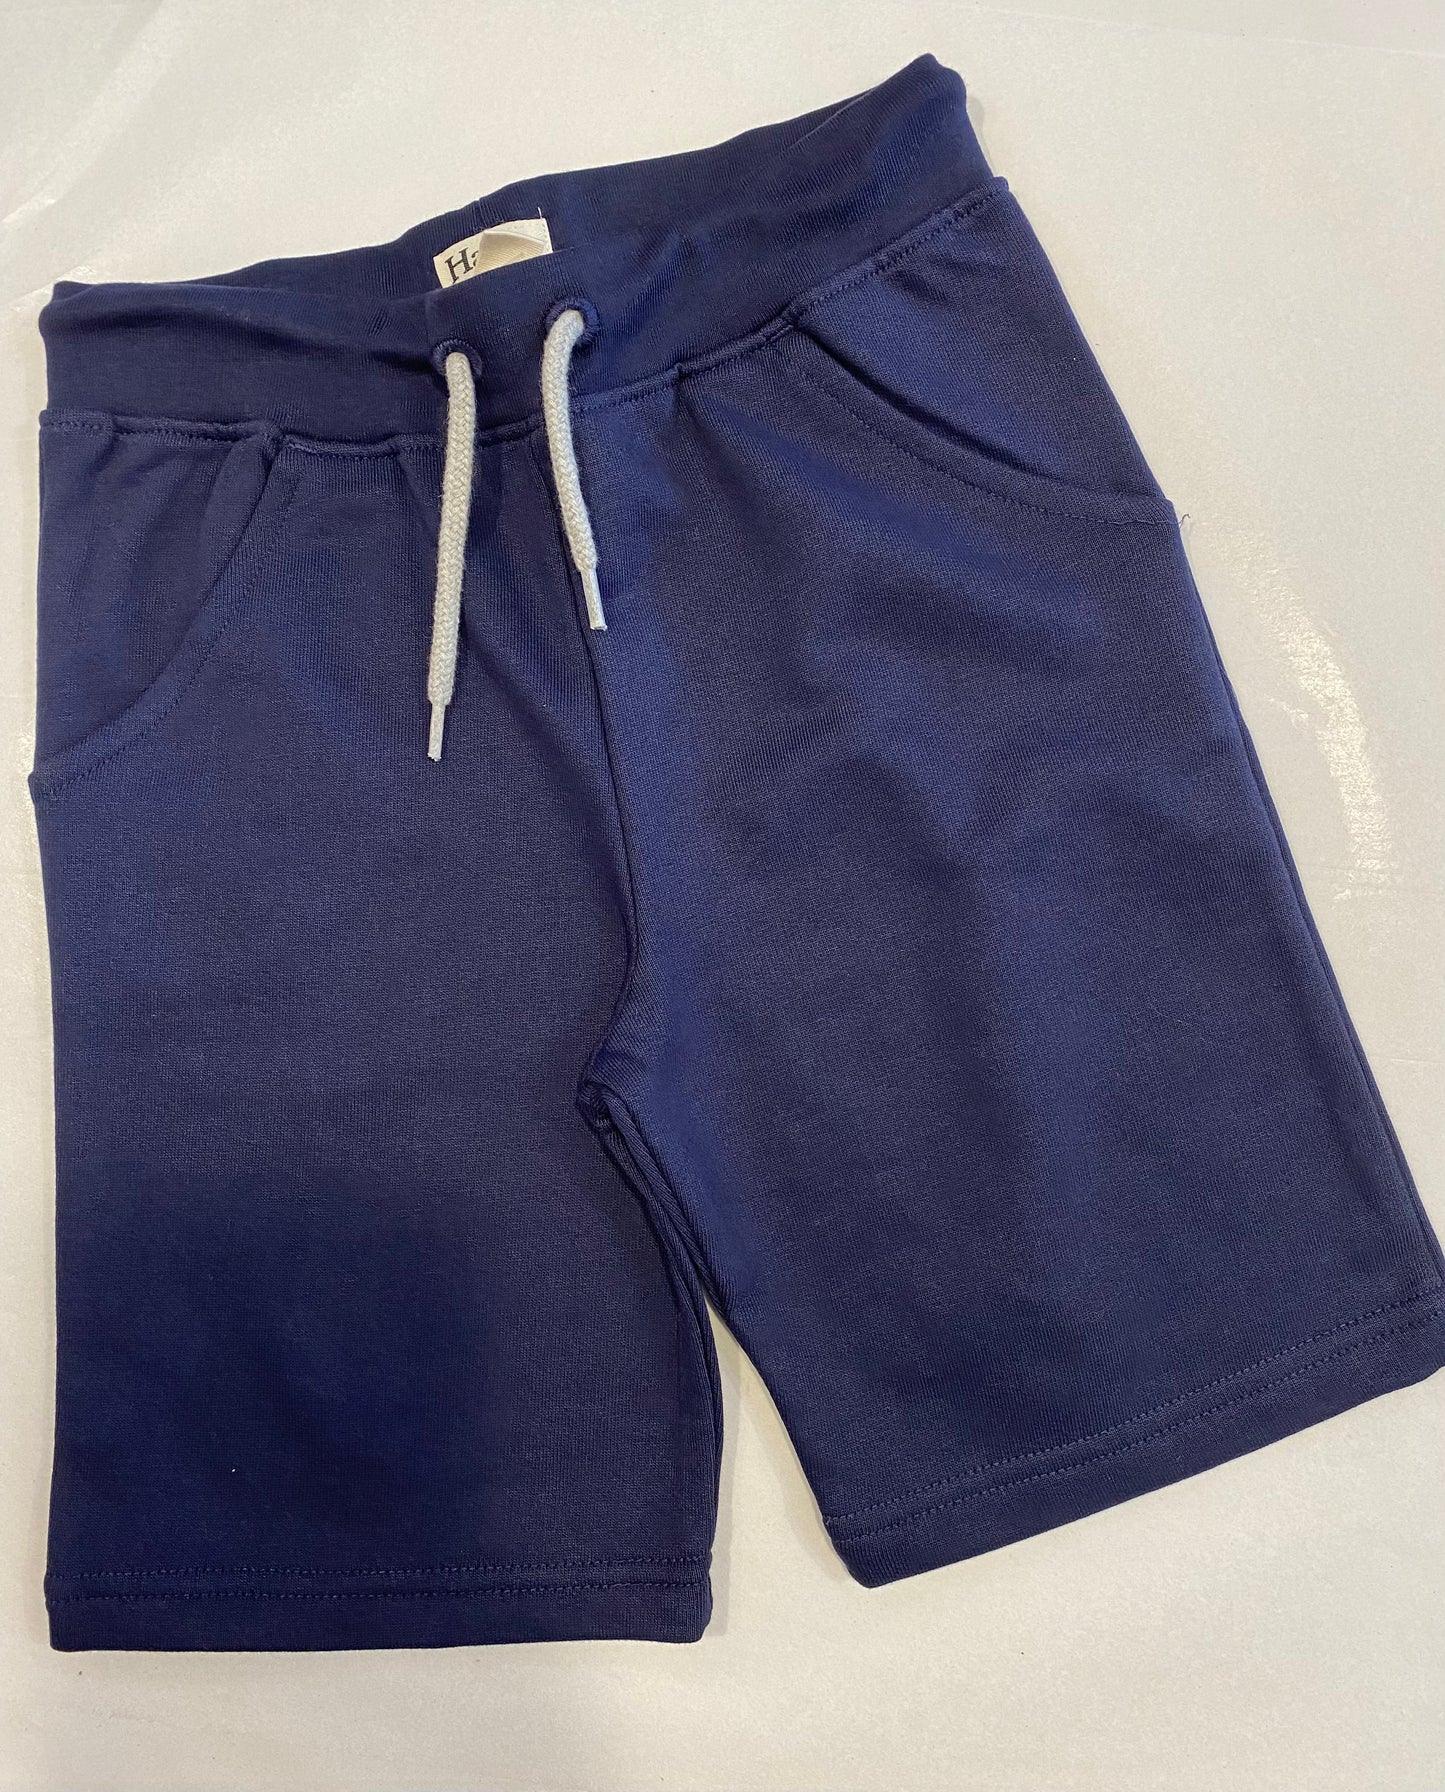 Navy Terry Shorts - Size 7